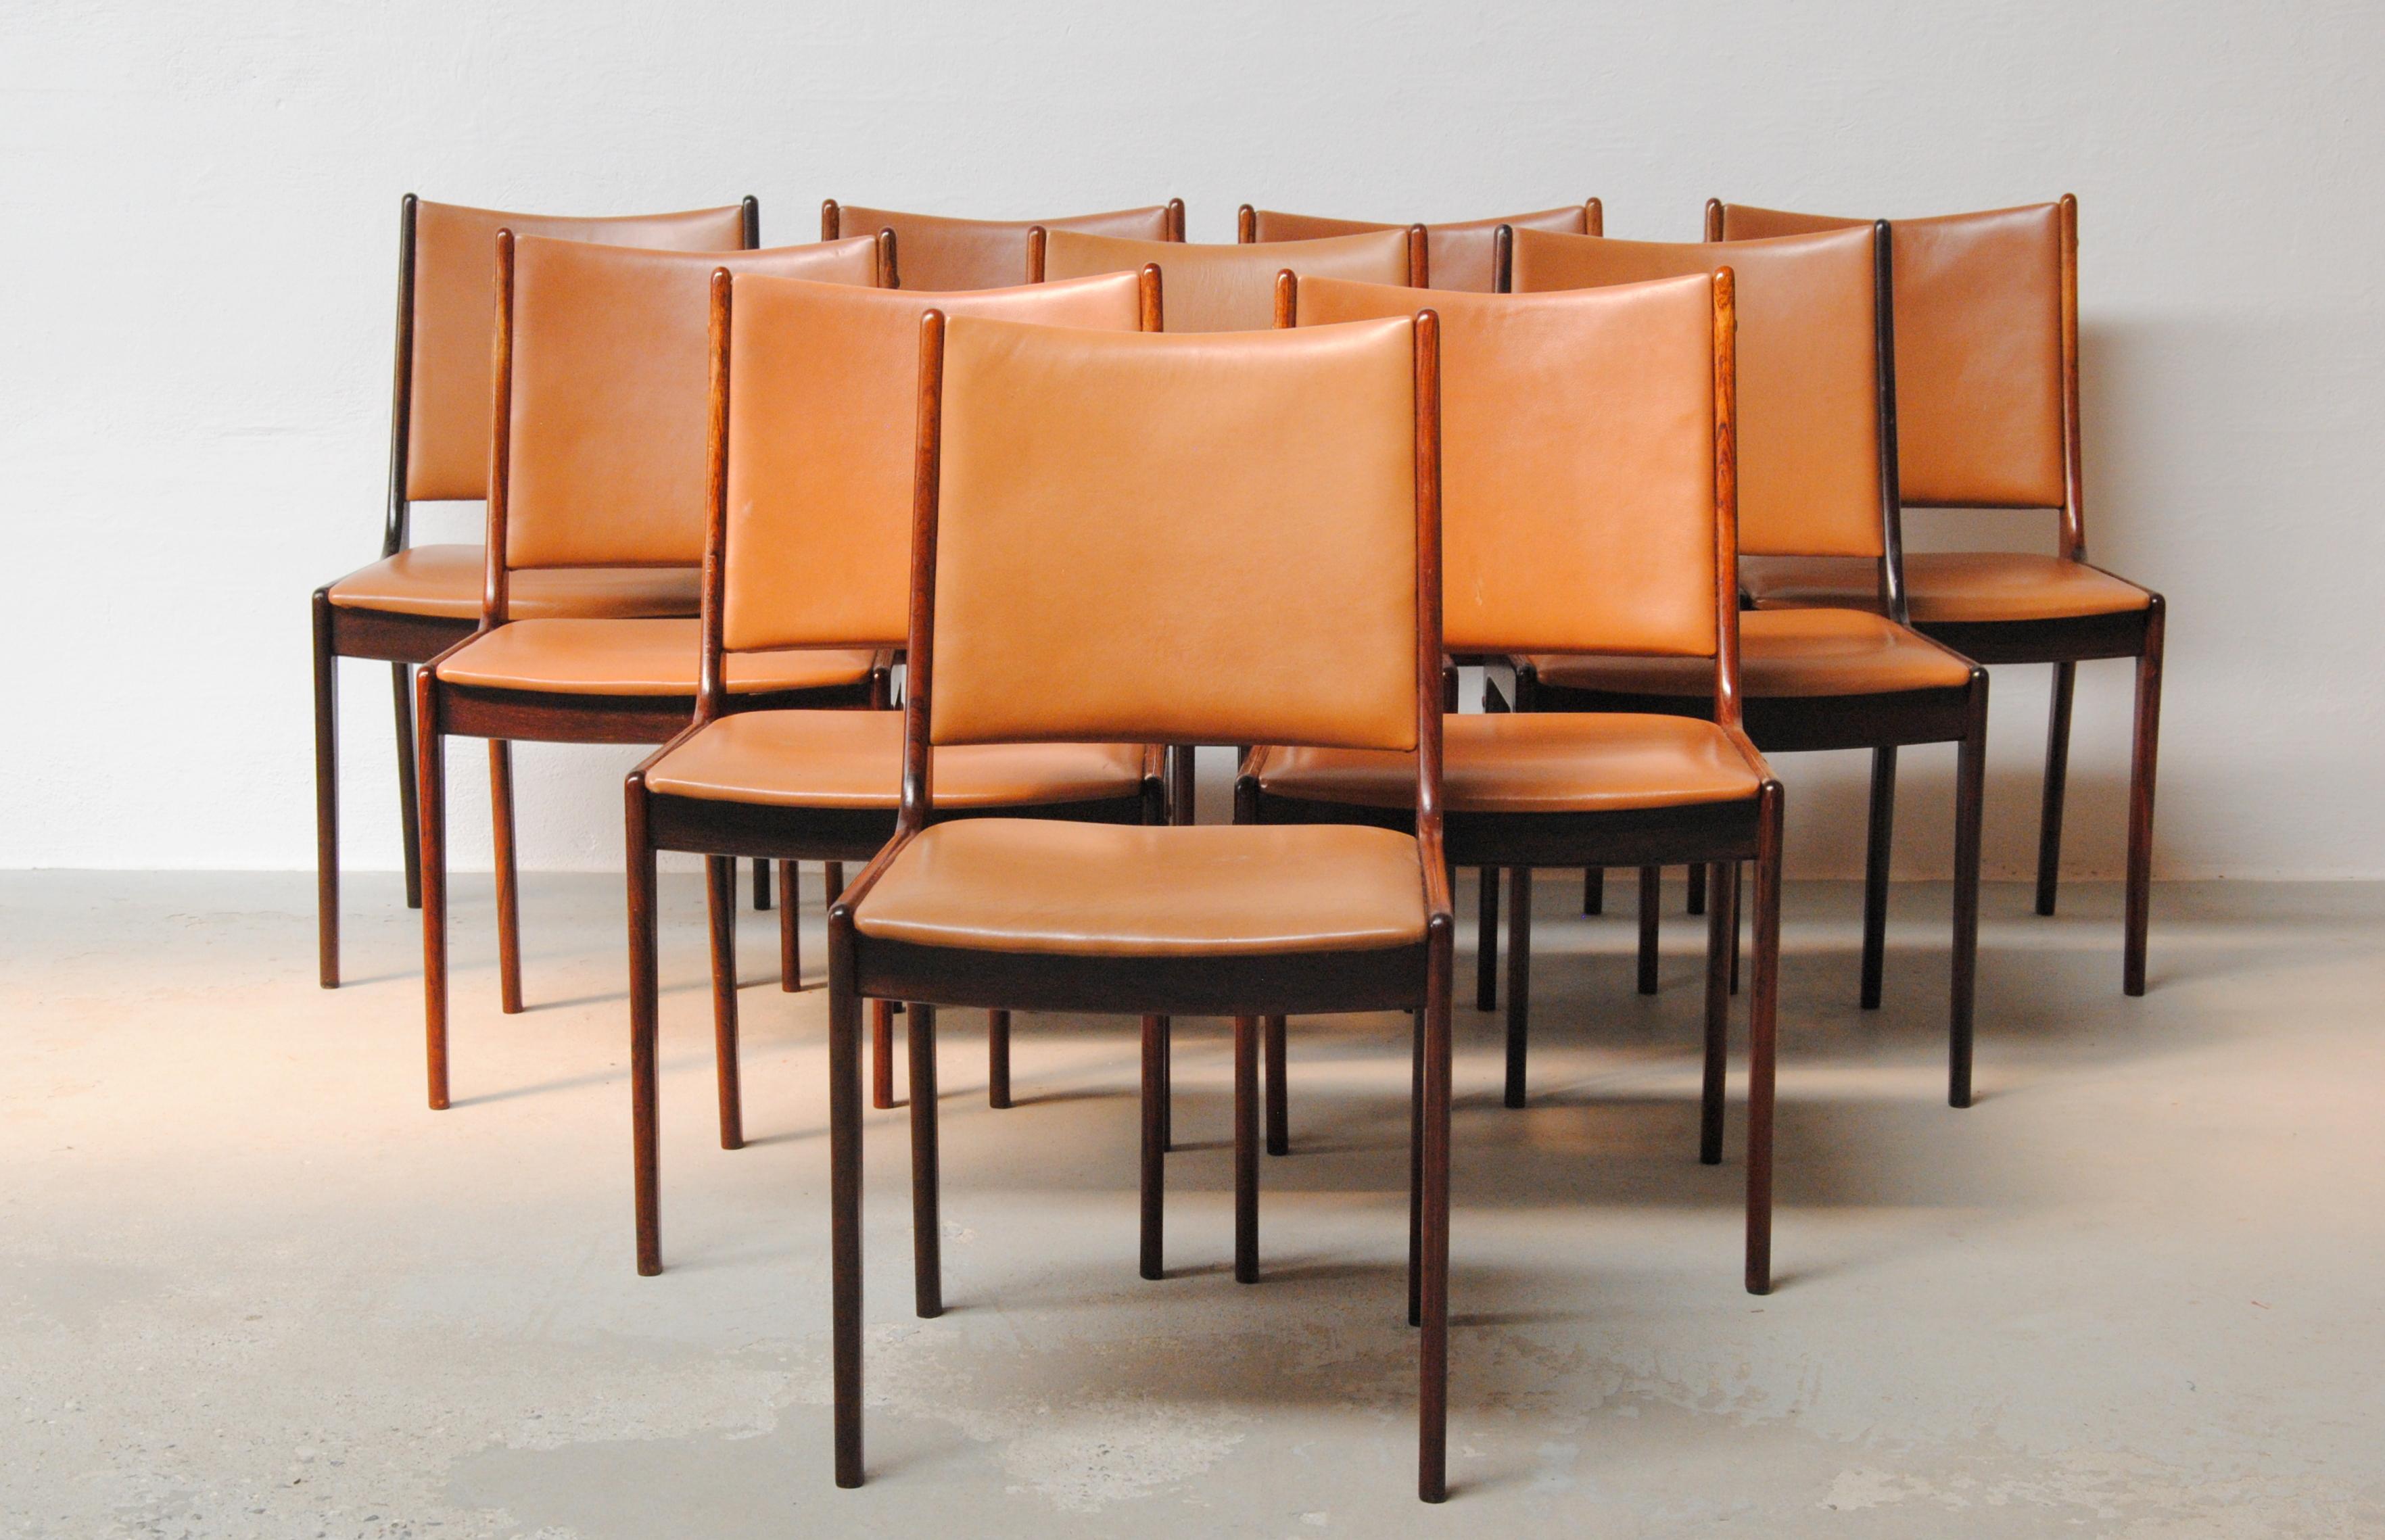 Set of ten fully restored 1960s Johannes Andersen dining chairs in rosewood made by Uldum Møbler, Denmark.

The set of dining chairs feature a clean simple yet elegant design that will fit in well in most houses. 

The chairs have been fully